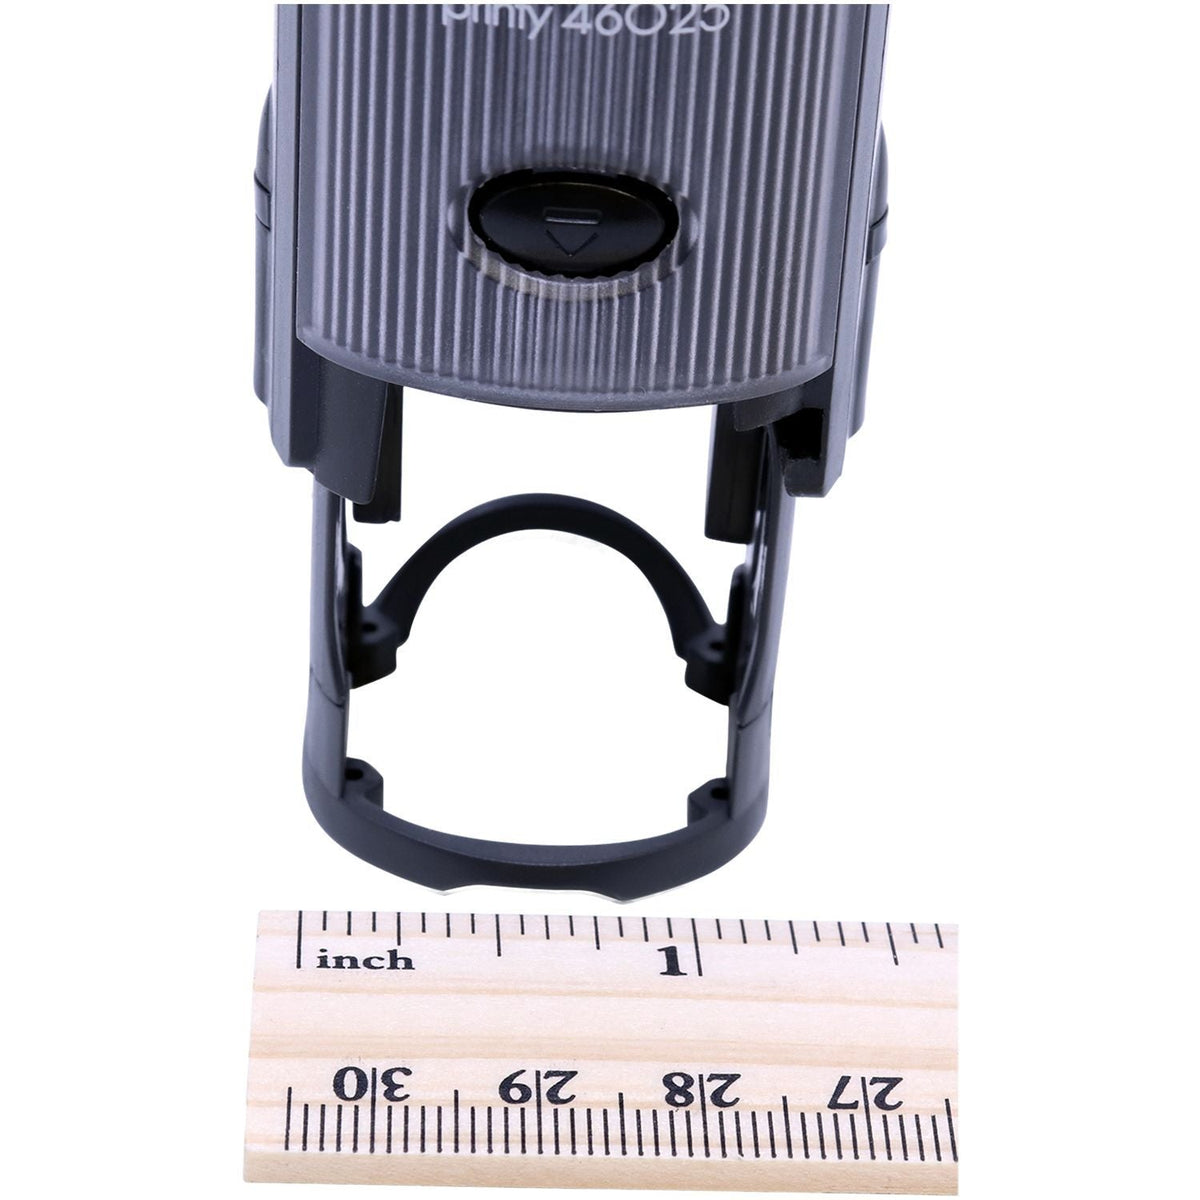 Measurment of Self-Inking Round Void Stamp with Ruler